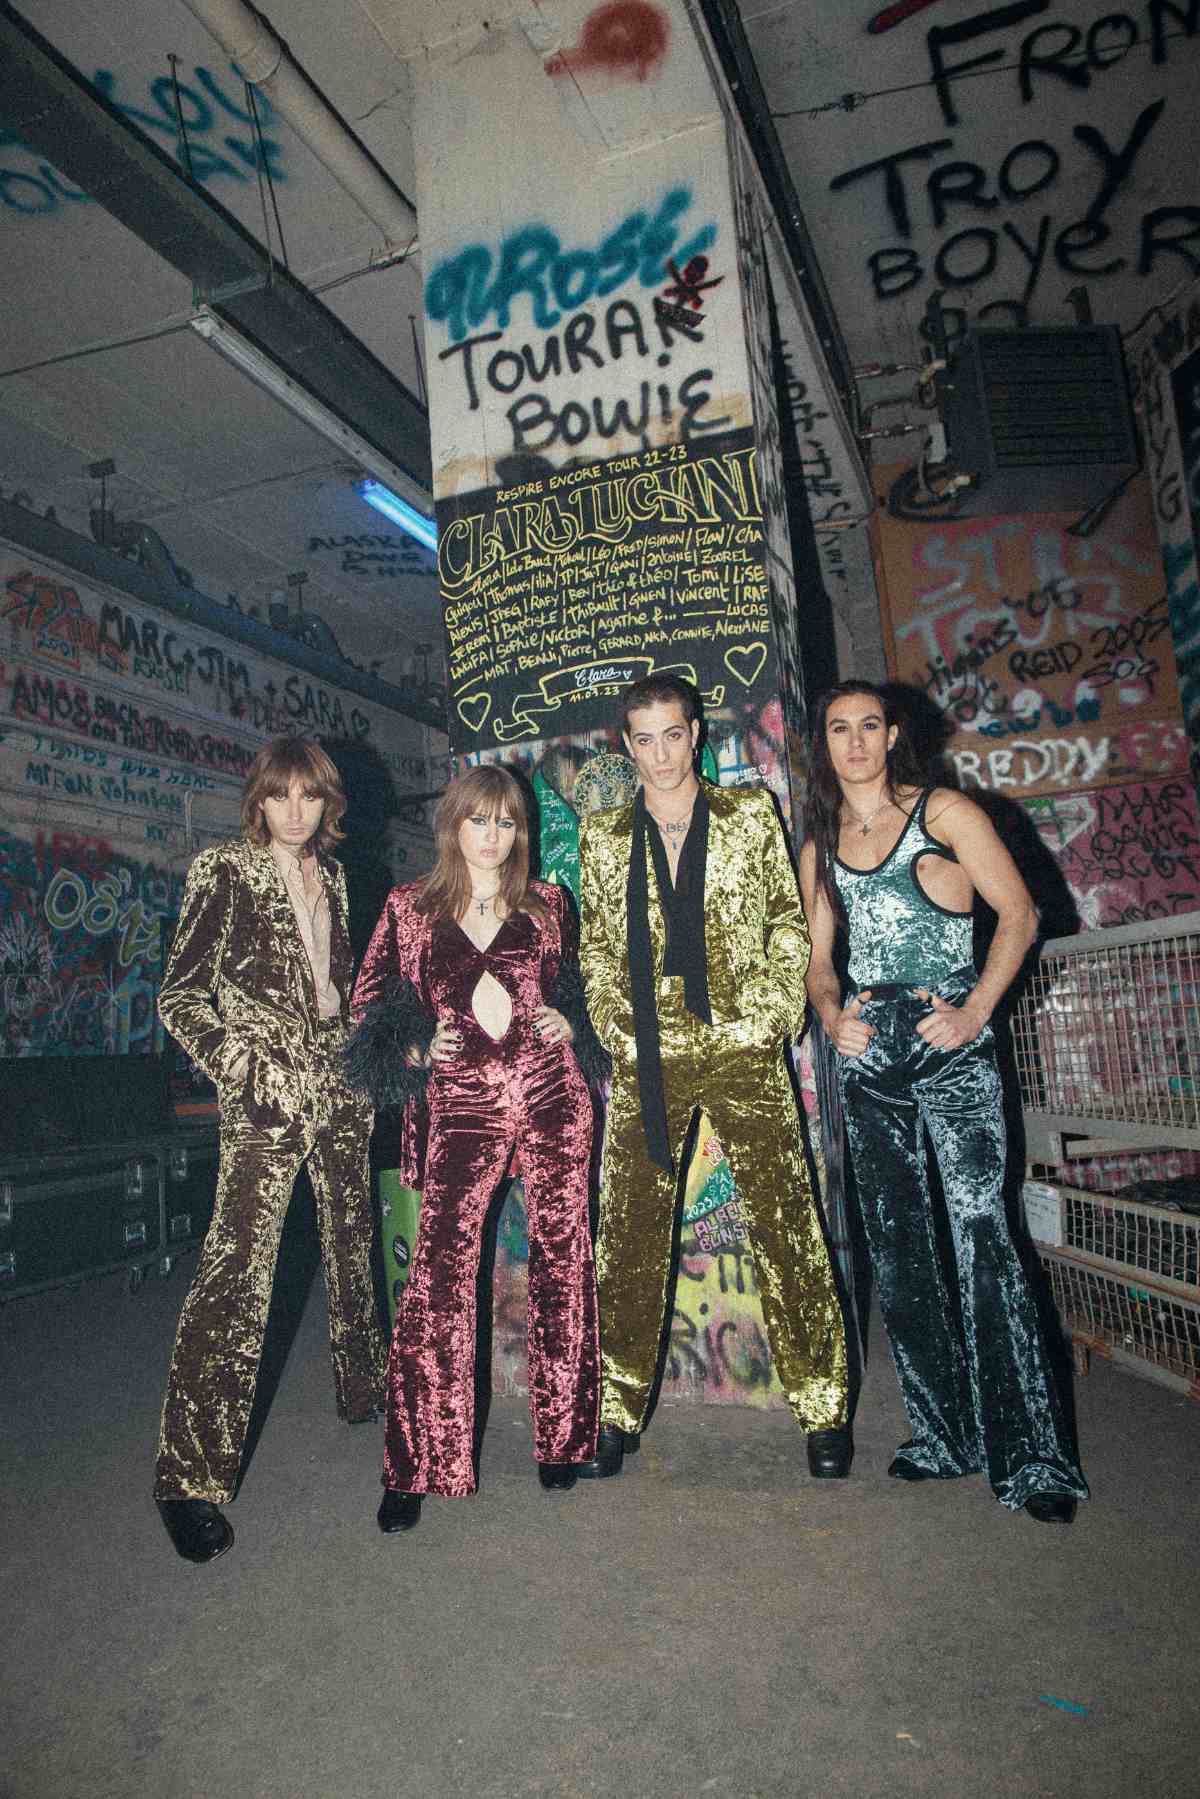 Maneskin In Gucci For Selected Dates Of Their “Loud Kids Tour” Throughout Europe